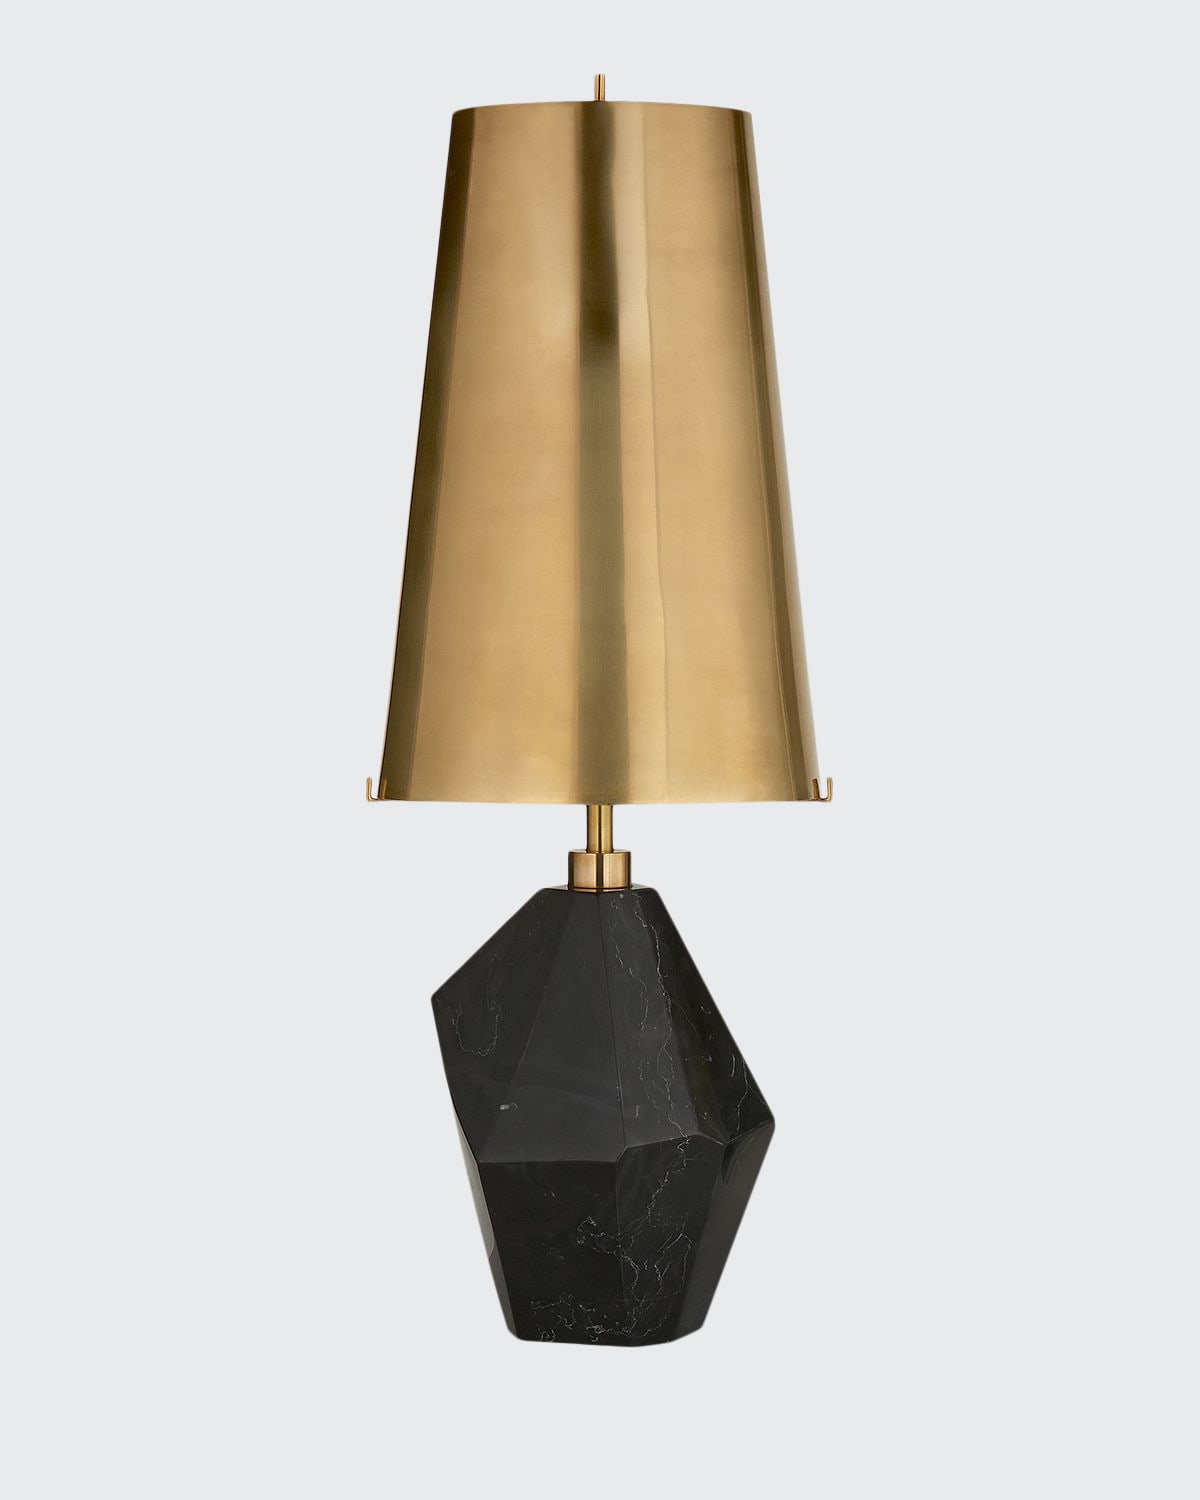 Kelly Wearstler For Visual Comfort Signature Halcyon Medium Accent Lamp In Black Cremo Marbl